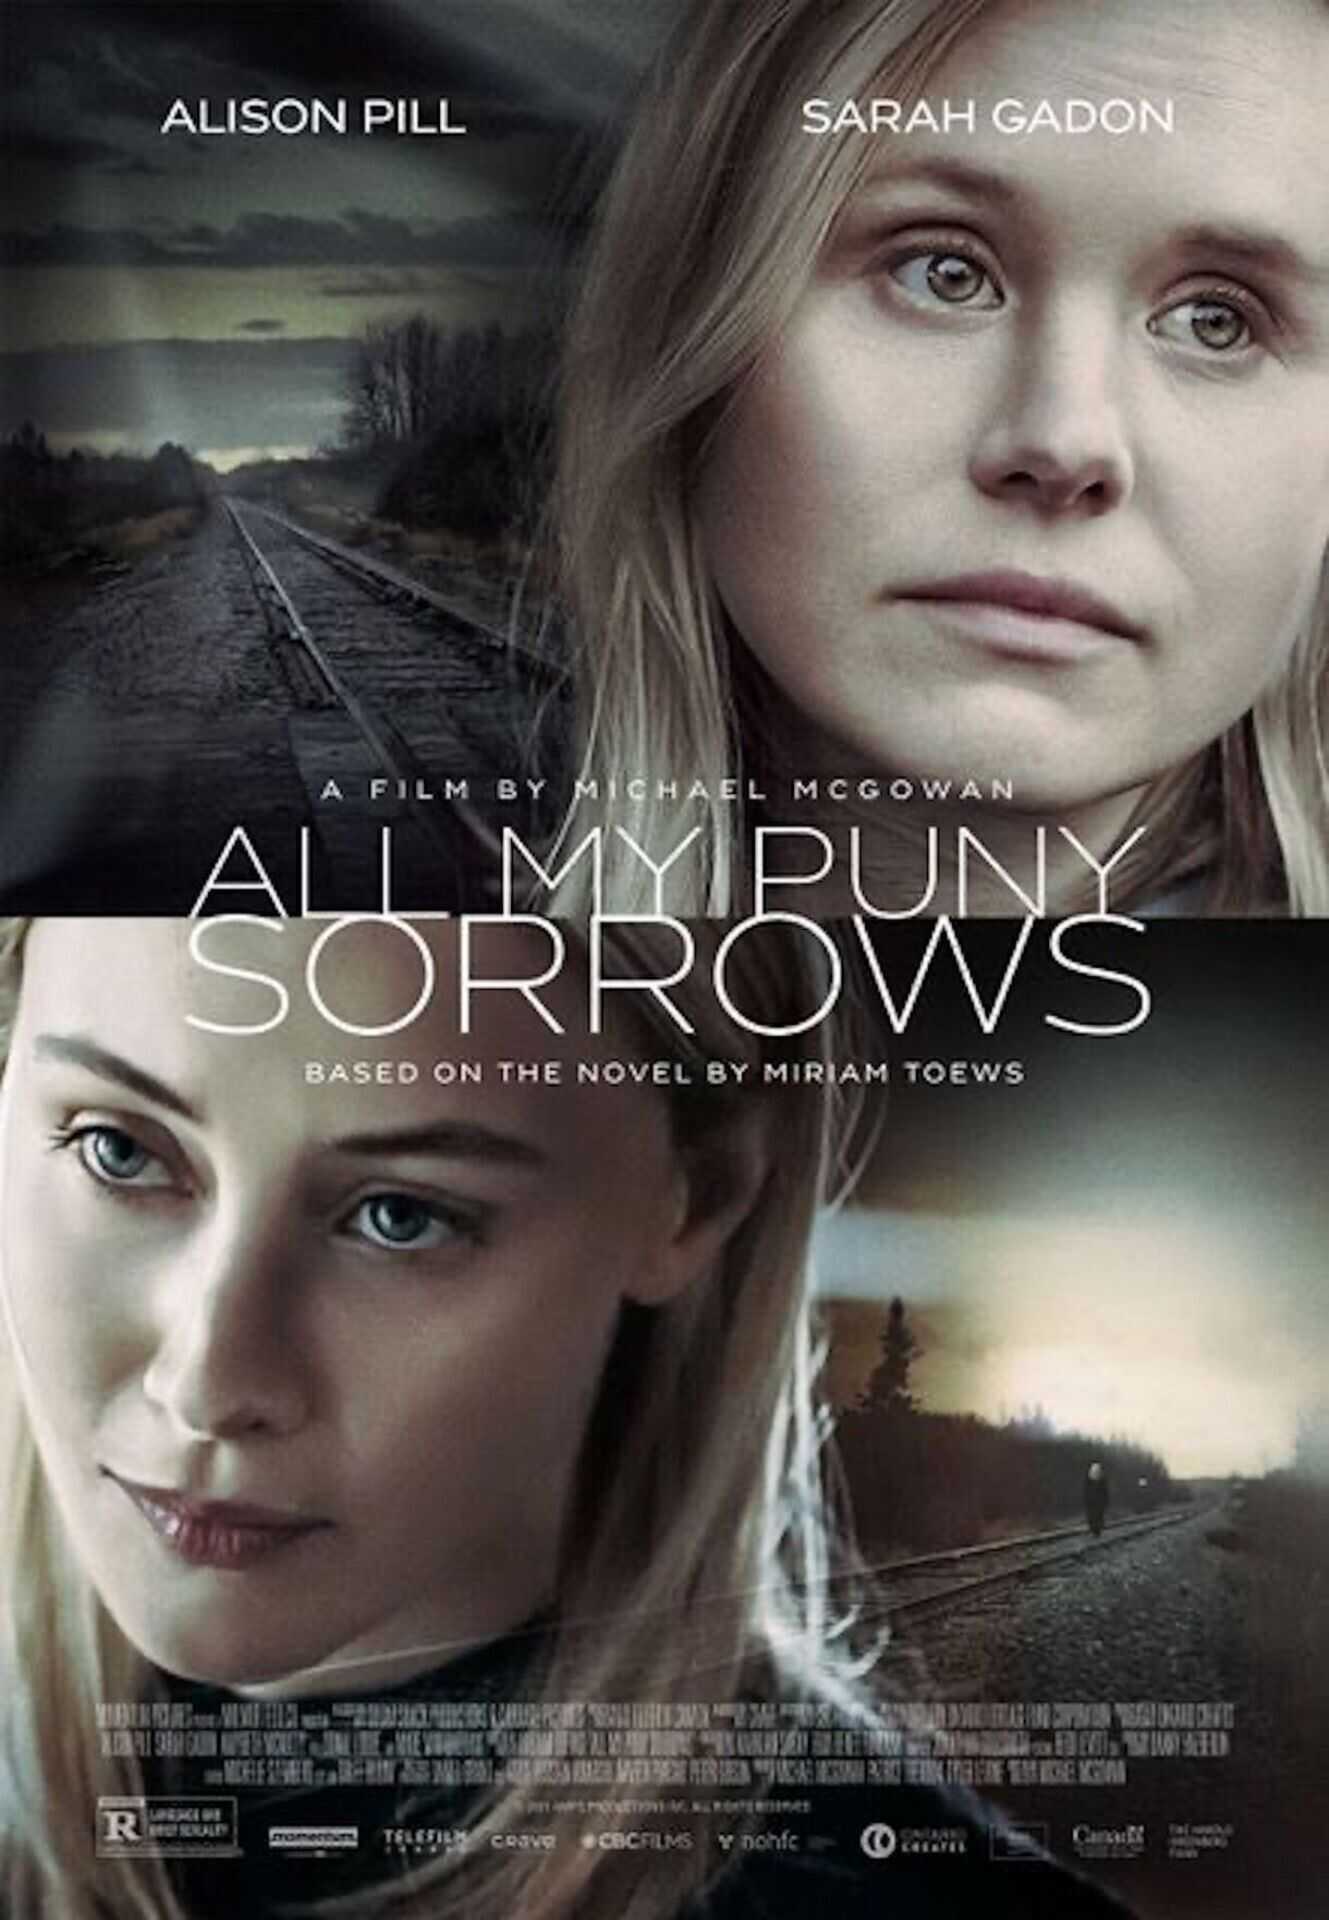 Theatrical poster for All My Puny Sorrows. A Momentum Pictures release. Courtesy of Momentum Pictures.